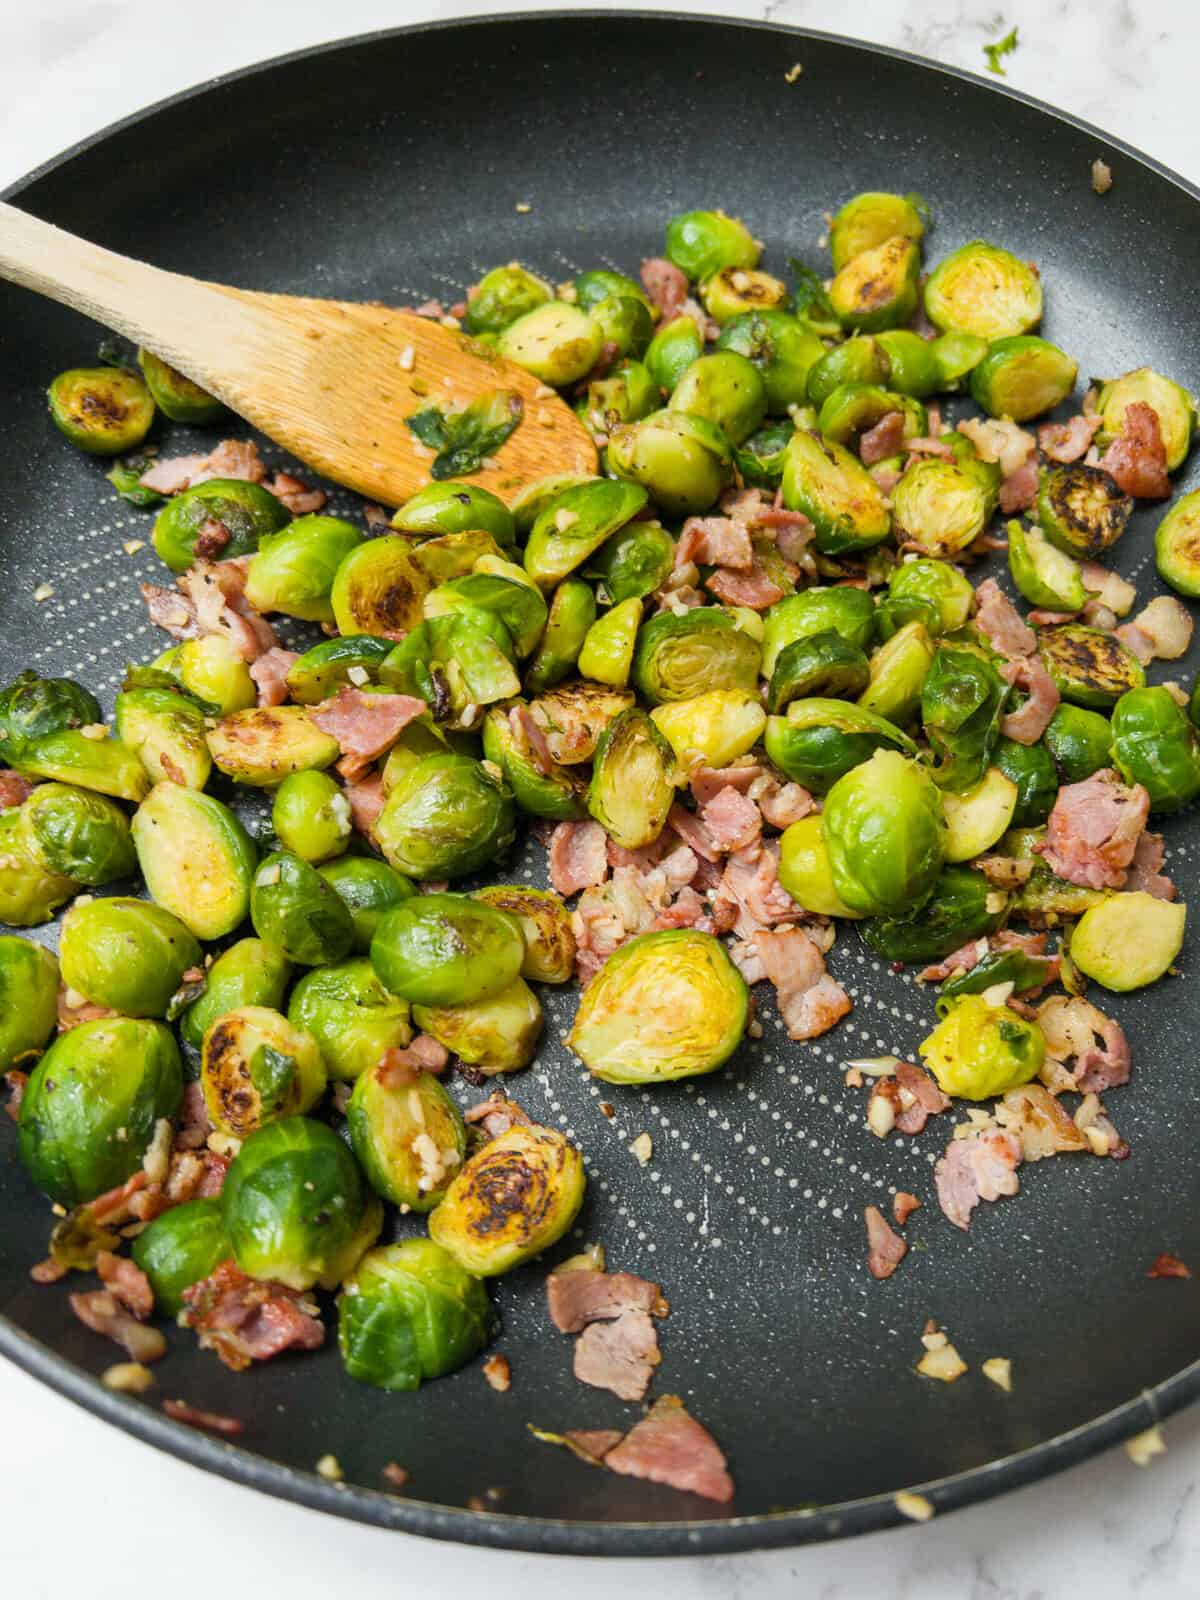 Brussel sprouts with garlic and bacon frying in a pan.